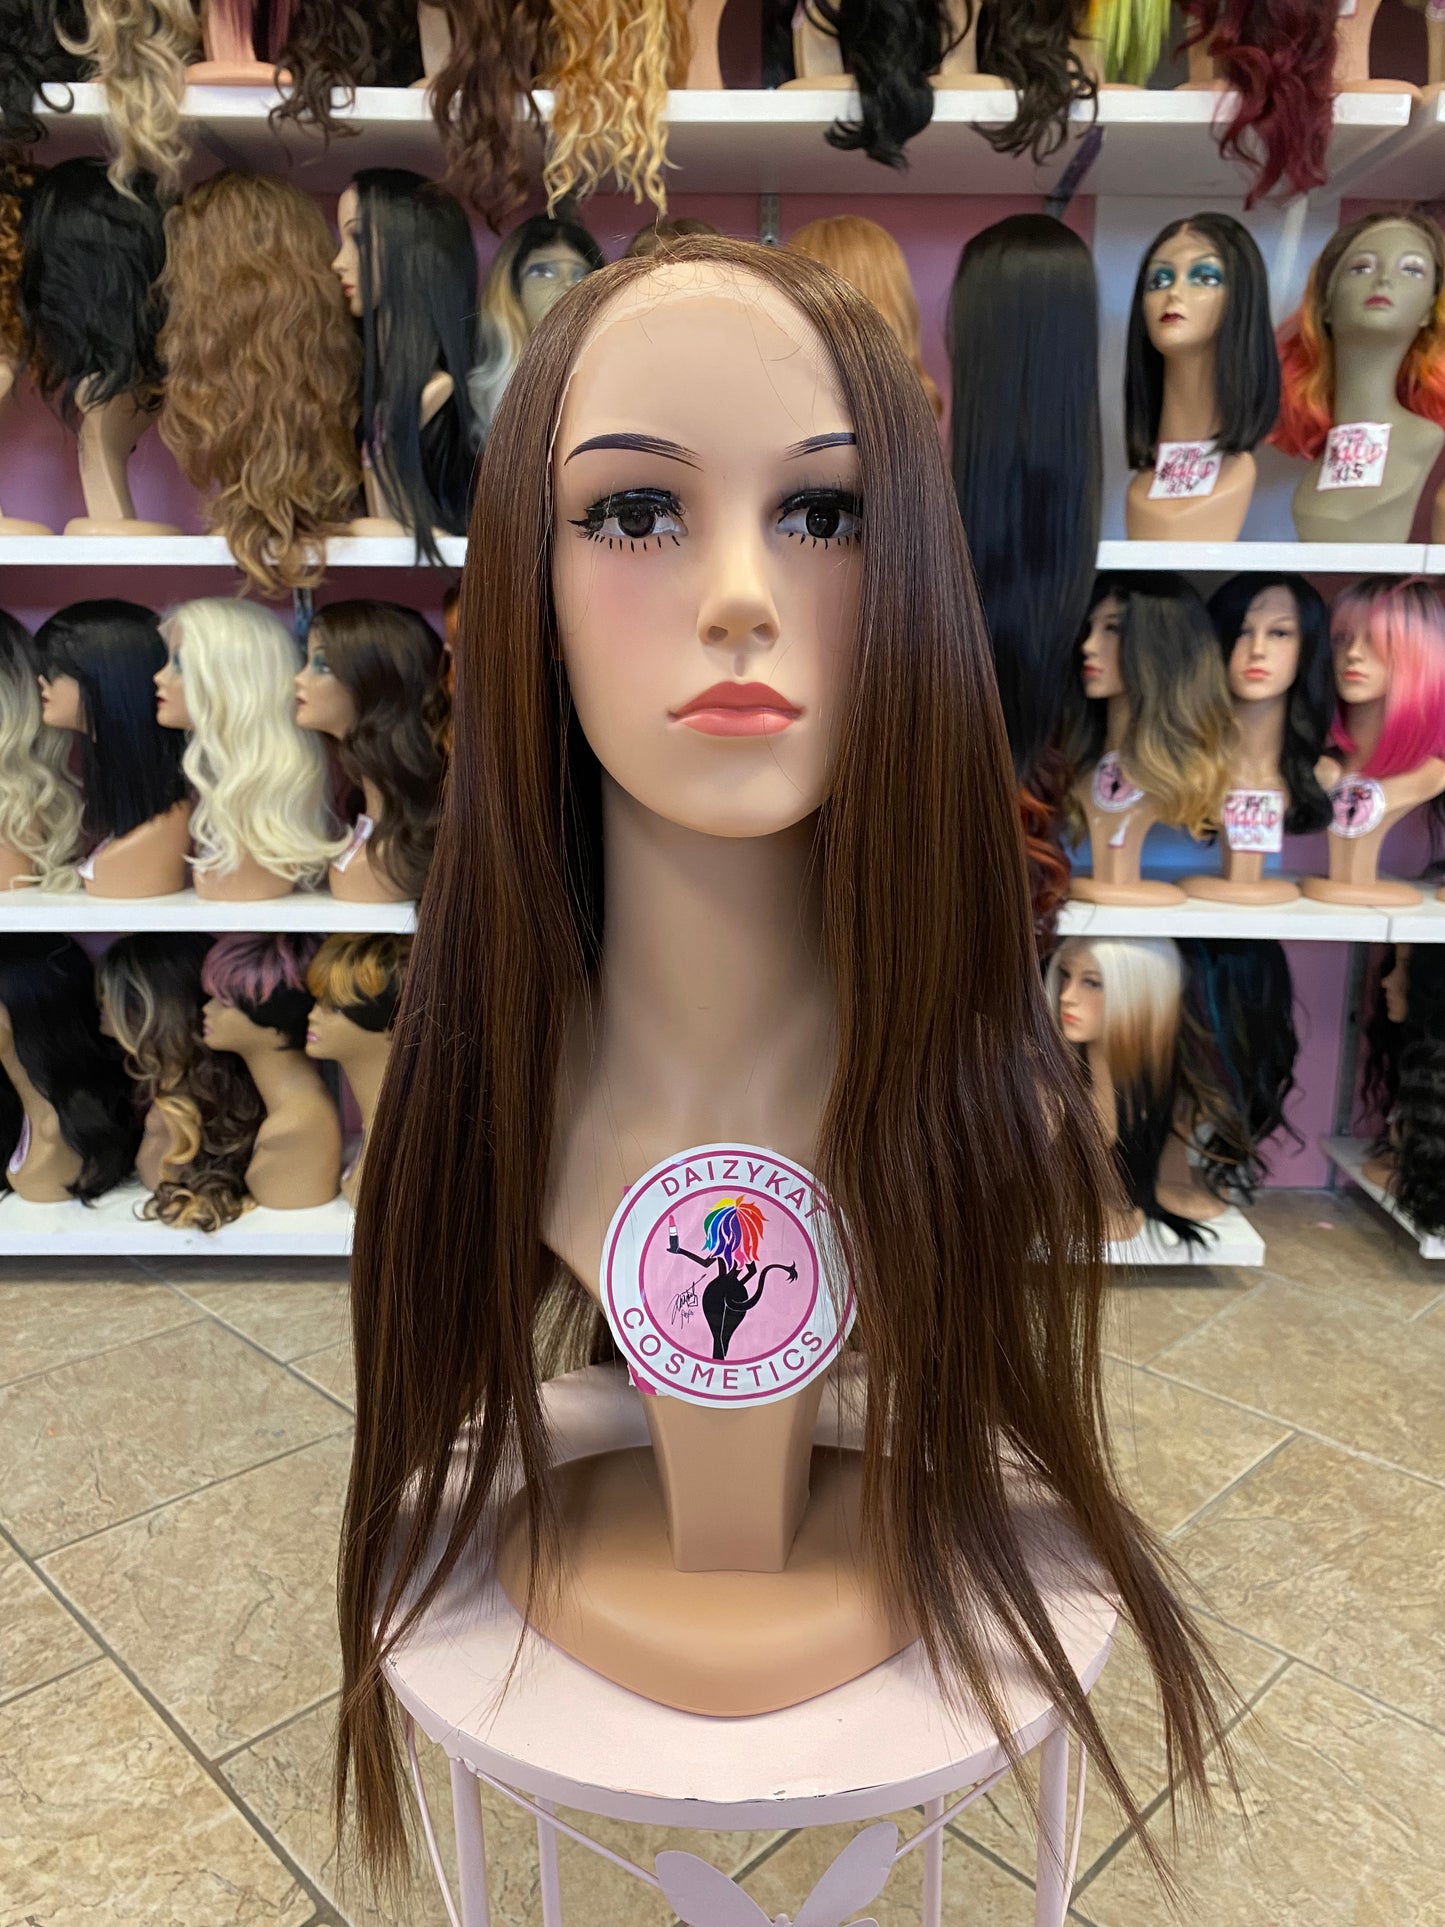 264 Charlotte - Right Part Lace Front Wig - 4/30 - DaizyKat Cosmetics 264 Charlotte - Right Part Lace Front Wig - 4/30 DaizyKat Cosmetics Wigs